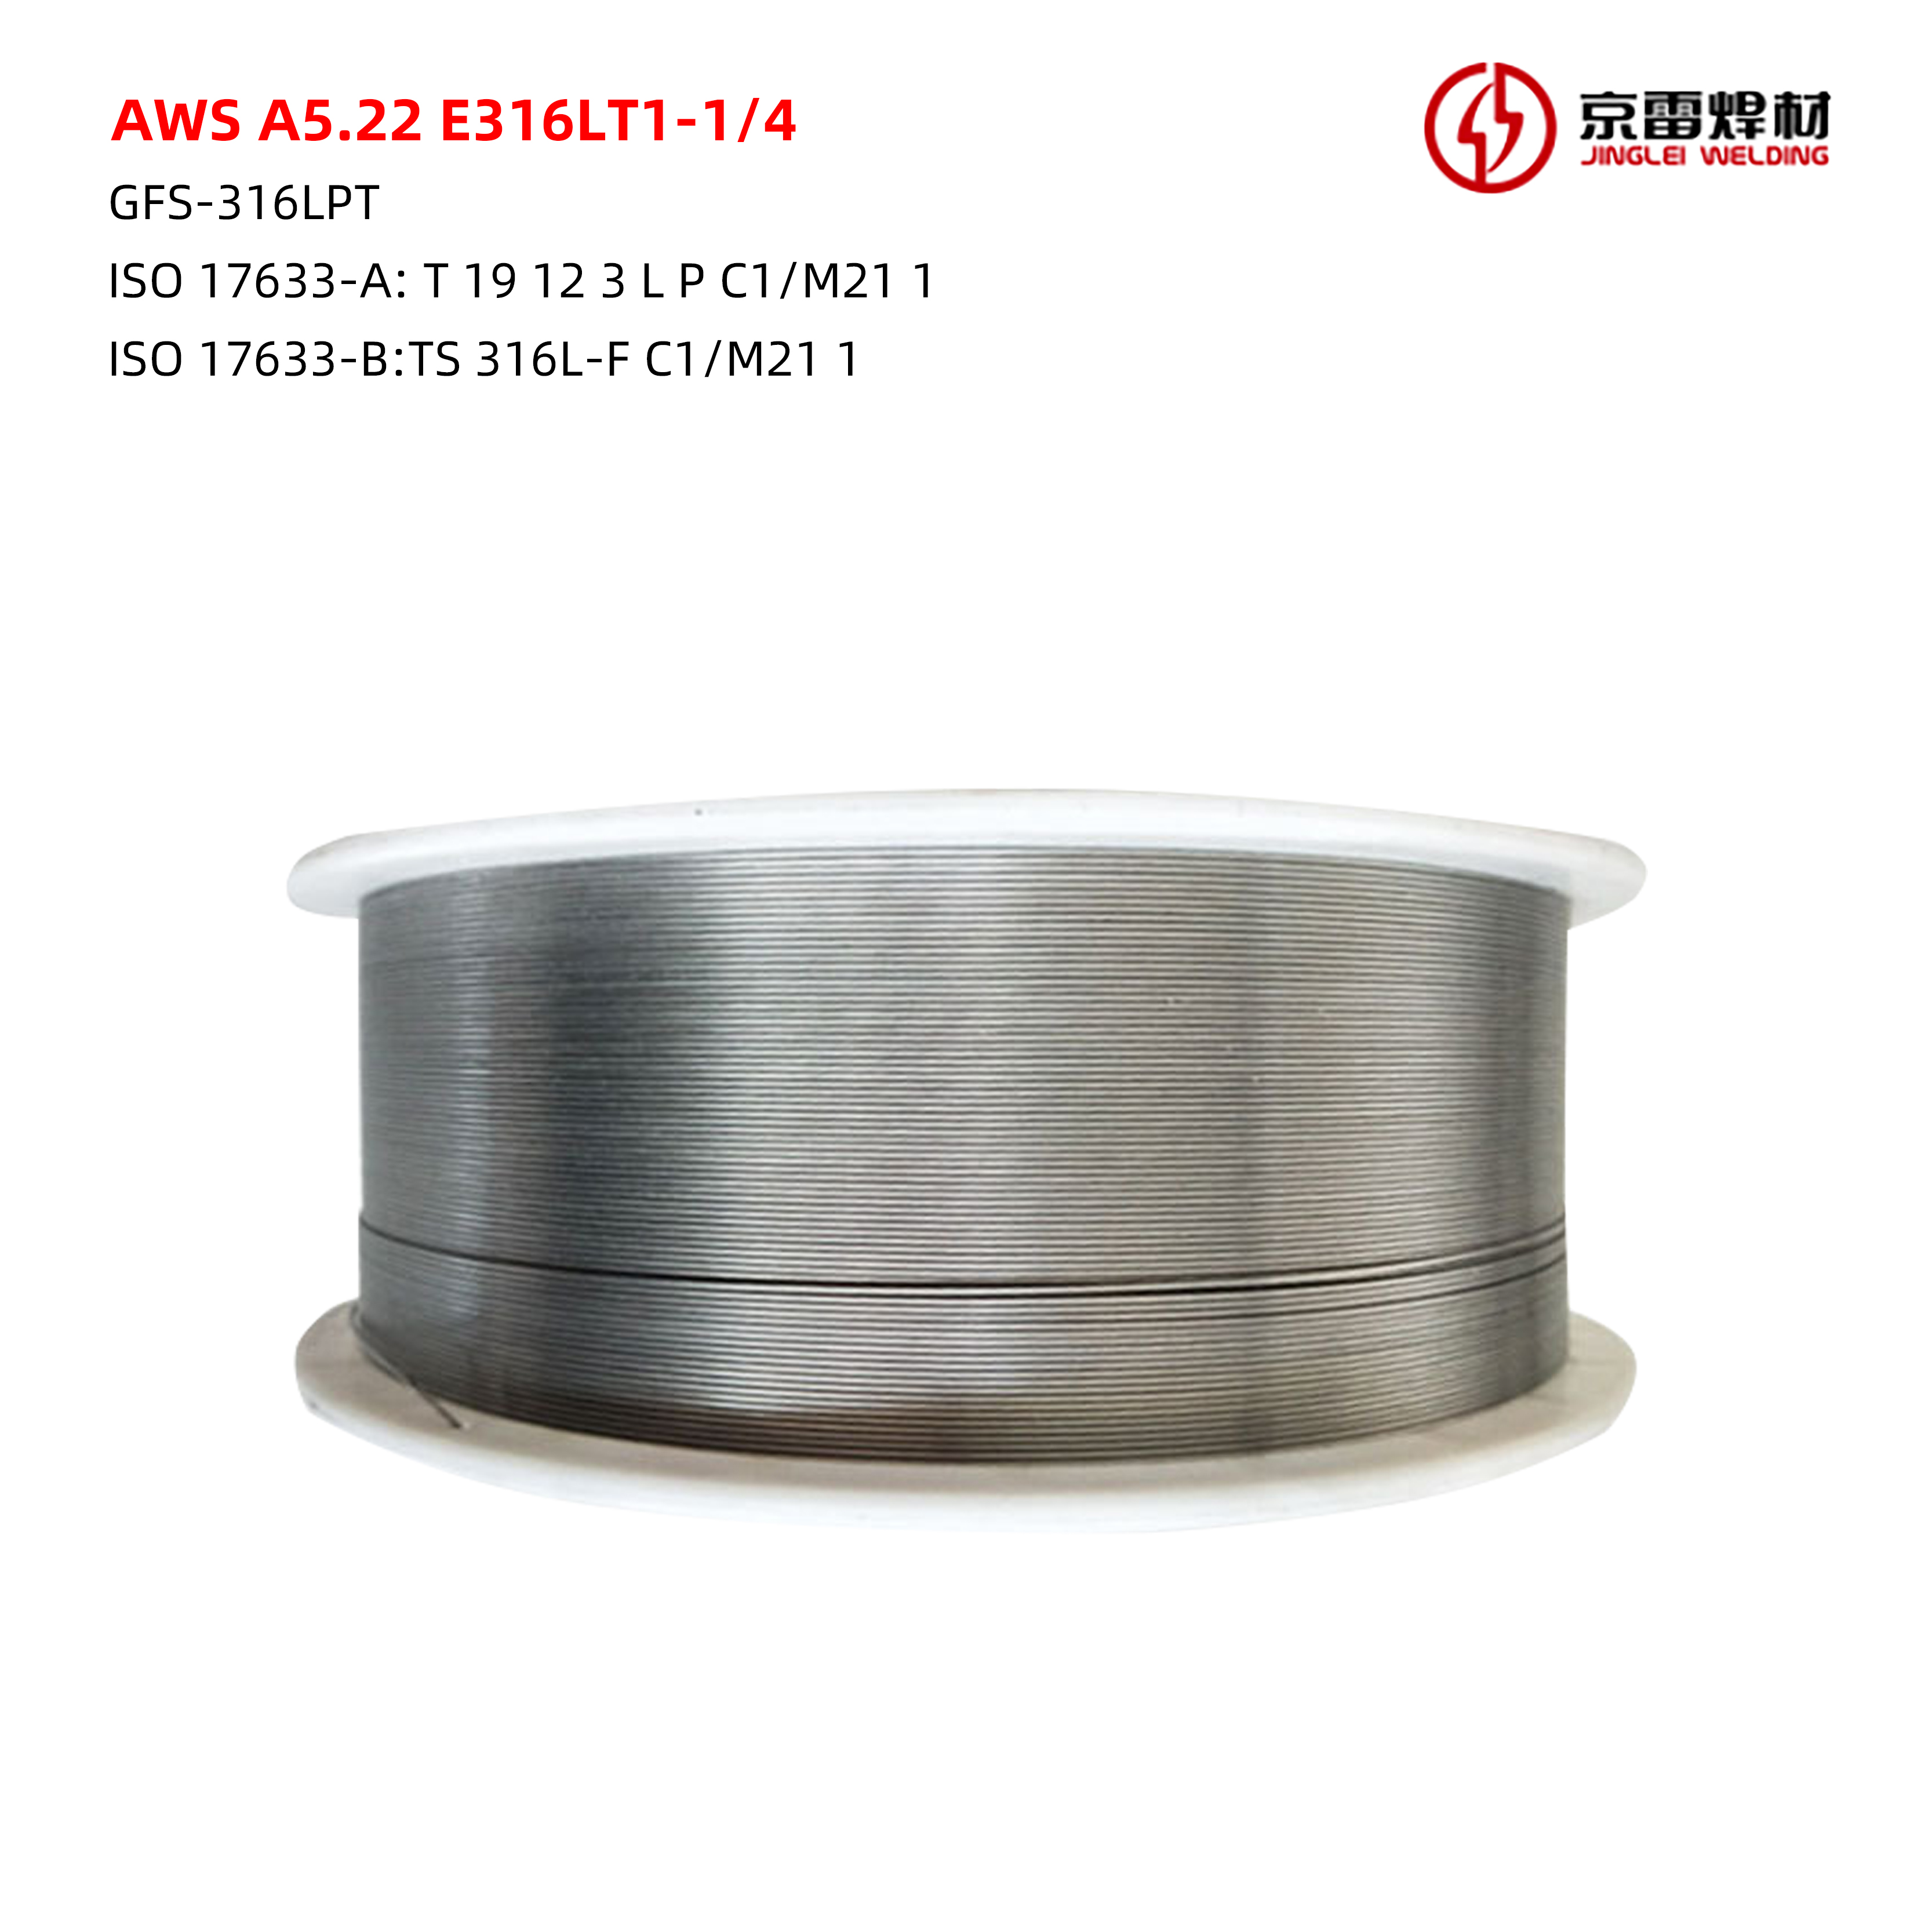 Stainless Steels Flux Cored Wire E316LT1-1/4 Sinopec refining and chemical weld